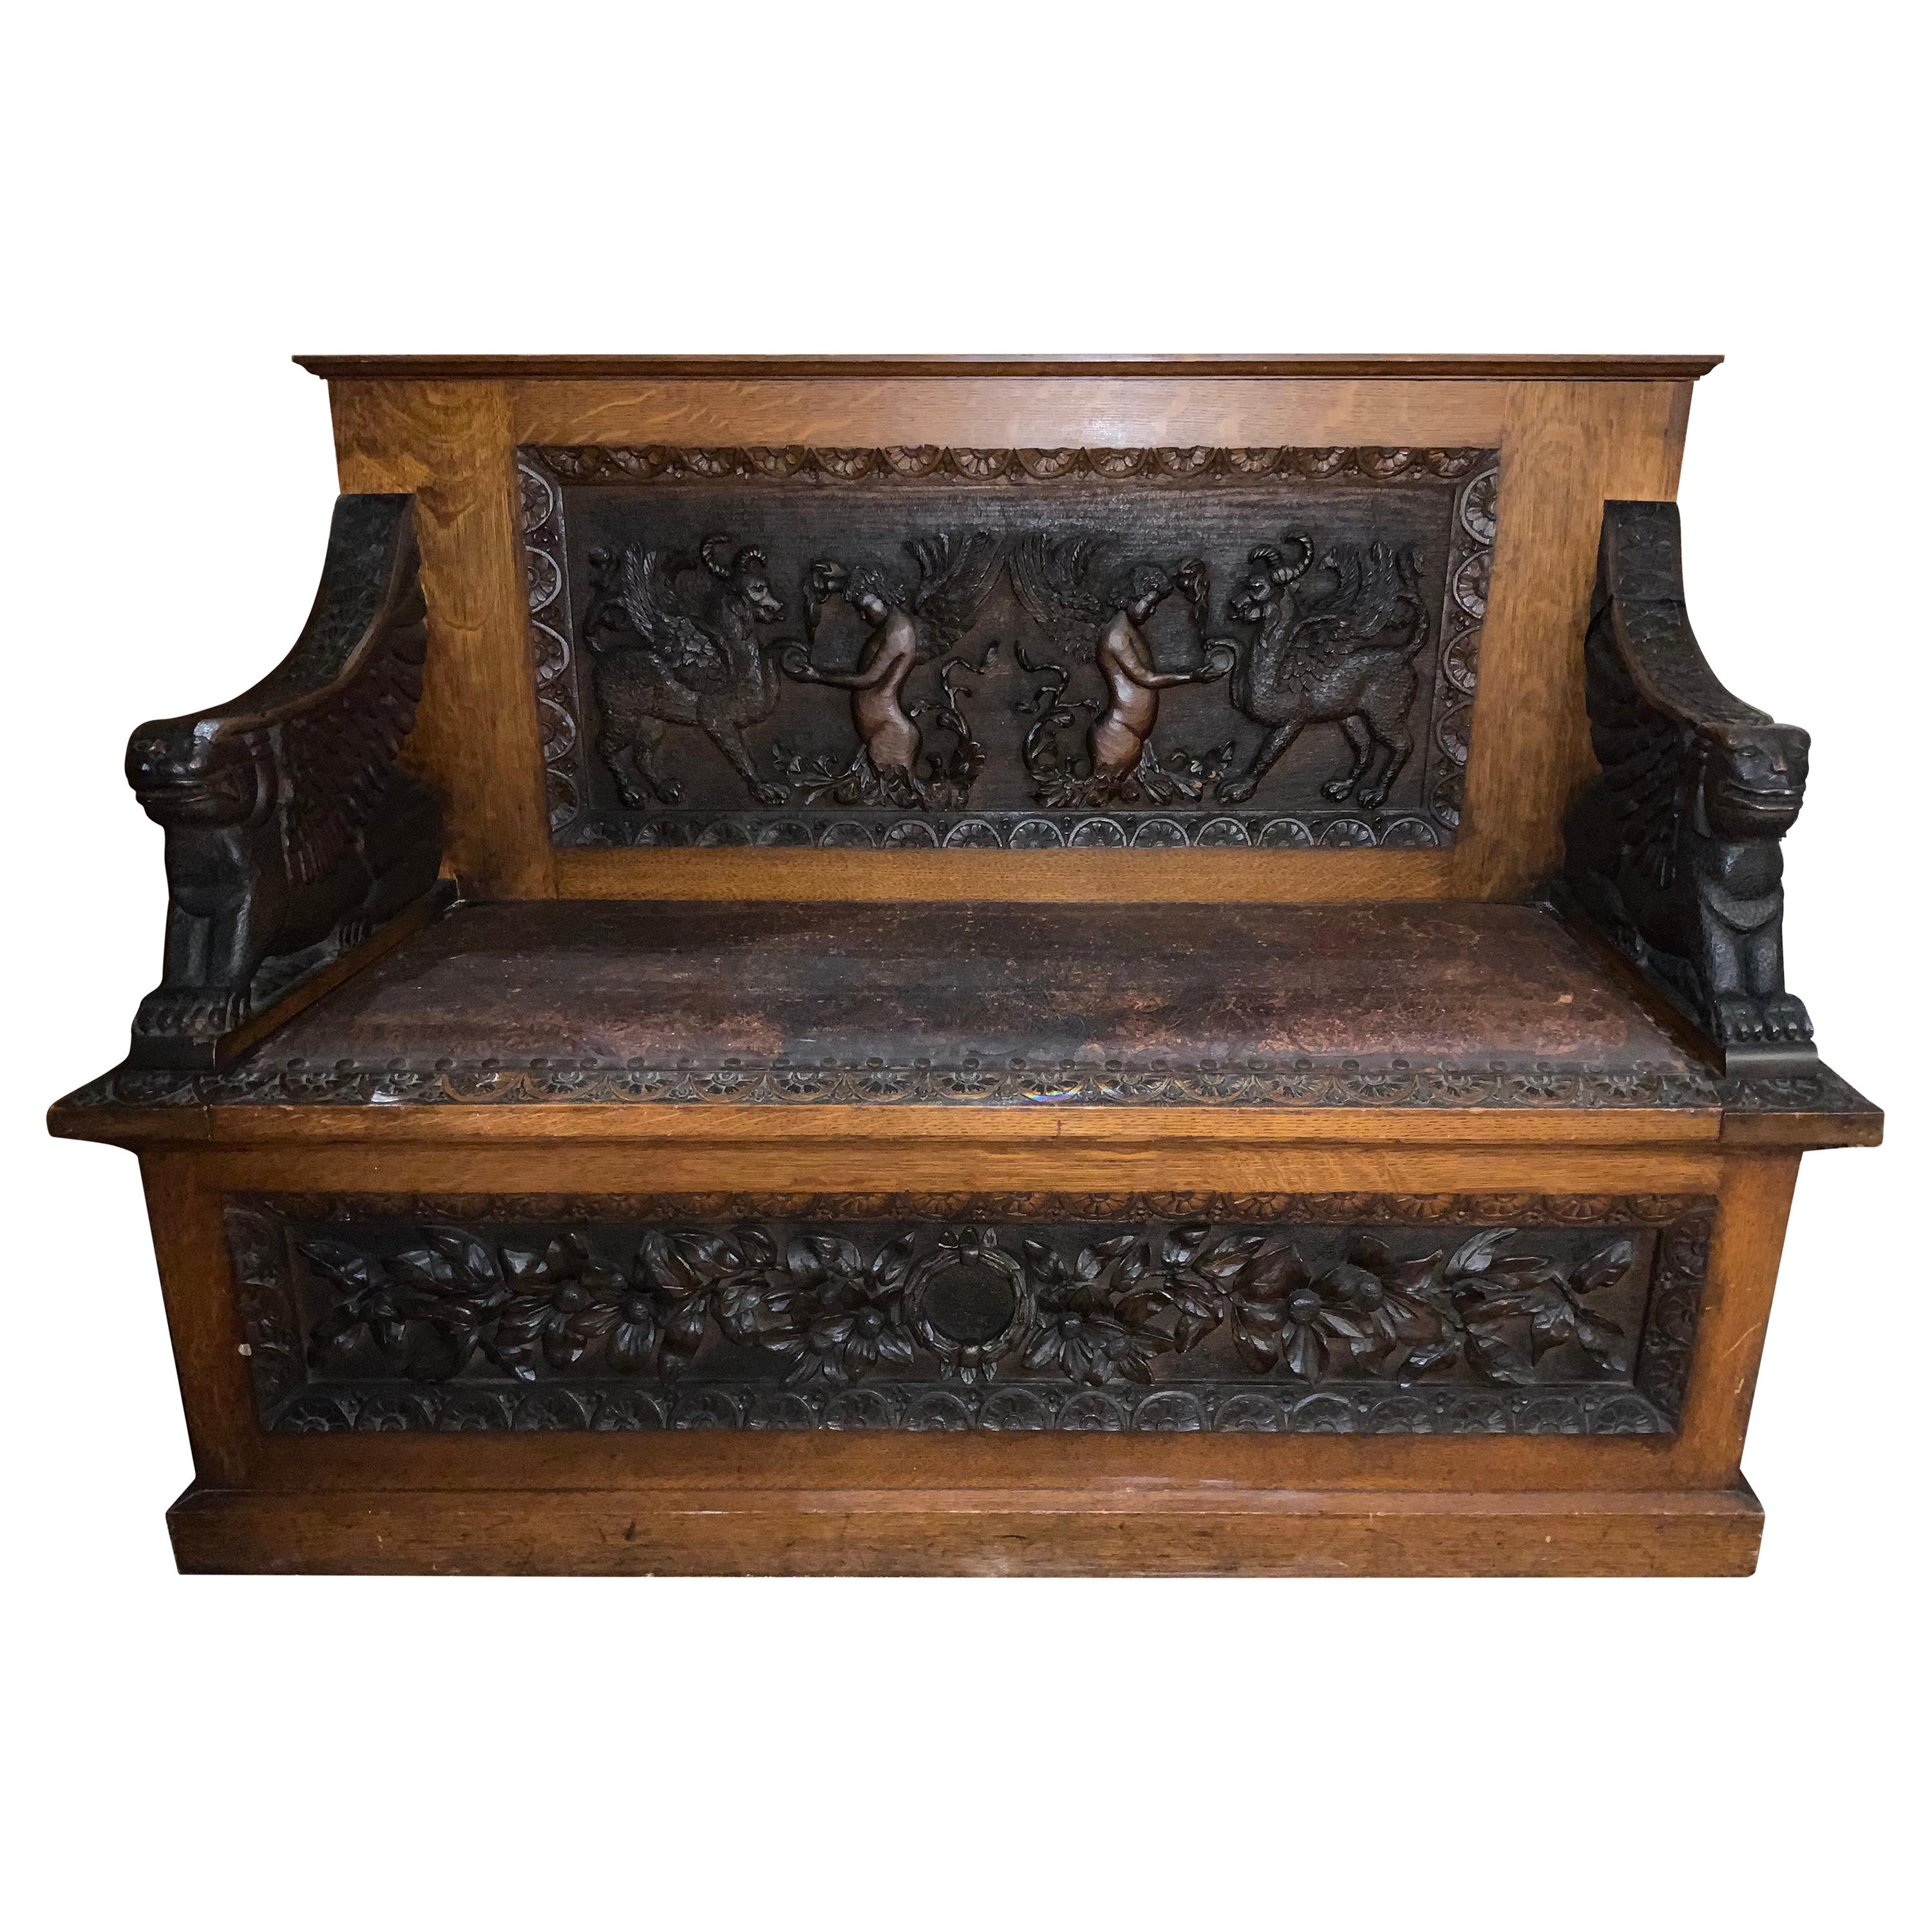 French Renaissance Style Heavily Carved Bench with Griffins and Angels